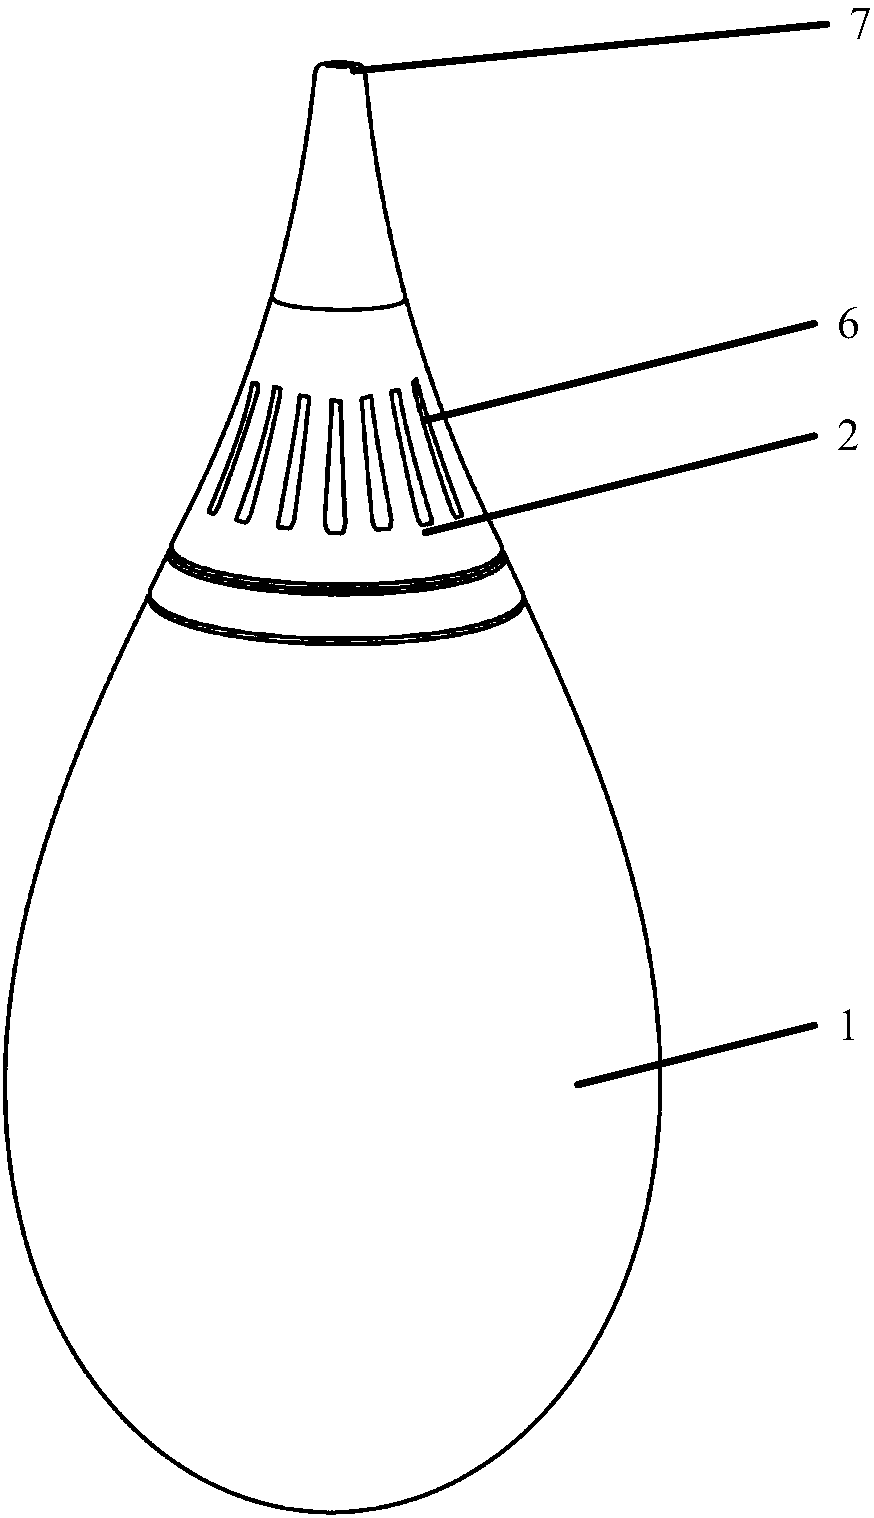 Air-blowing device